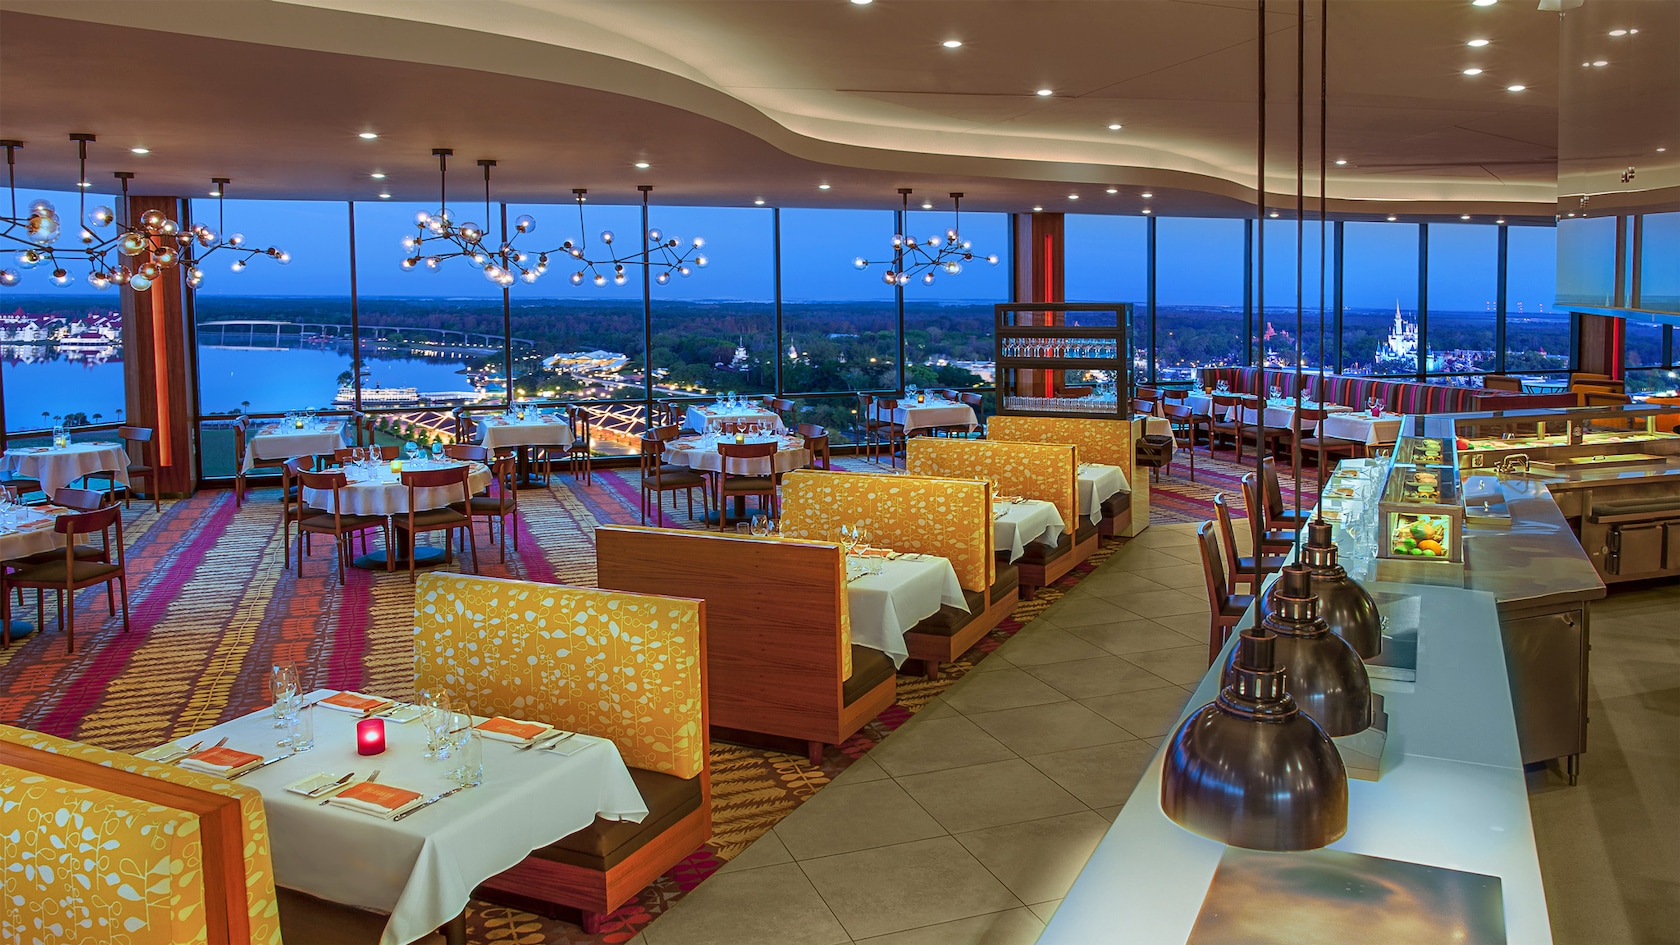 The California Grill at the Contemporary Resort